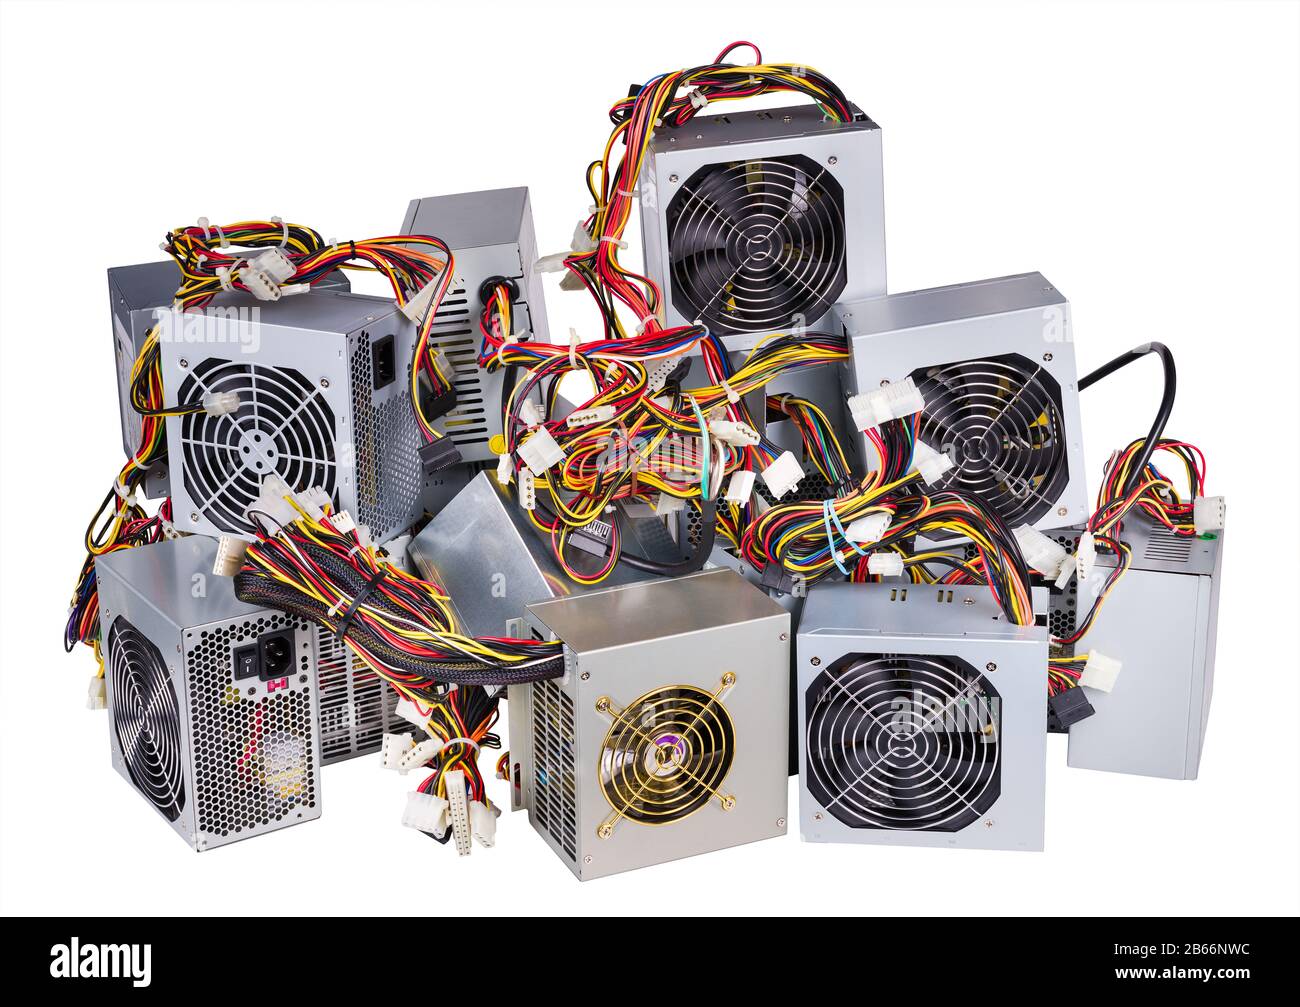 Group of computer power supply units. Pile of hardware spare parts. Square metal boxes with fans, electronic components and colorful cables. E-waste. Stock Photo